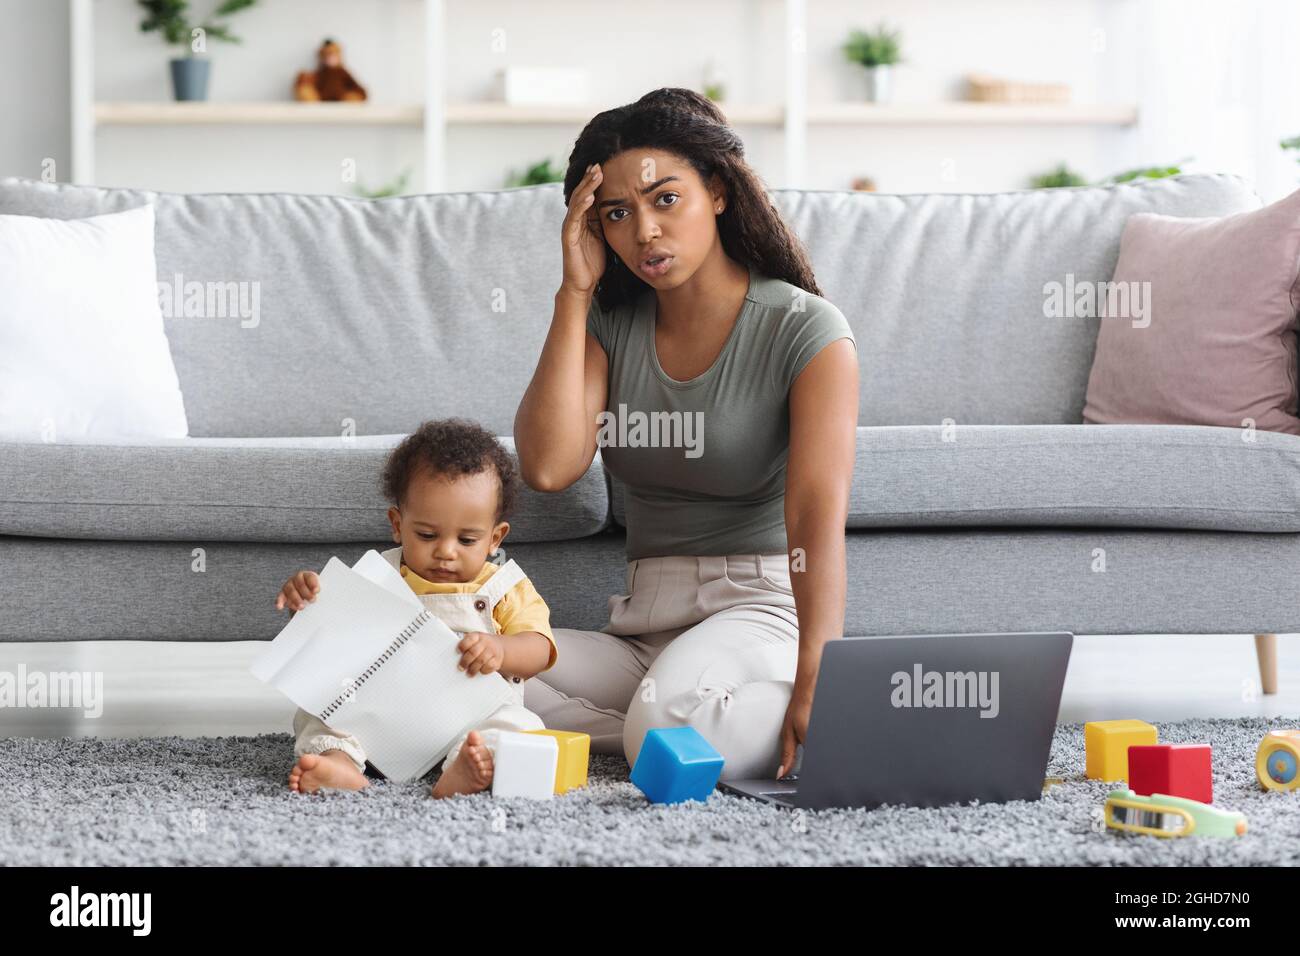 Stressed Black Mother Trying To Work At Home While Baby Distracting Her Stock Photo